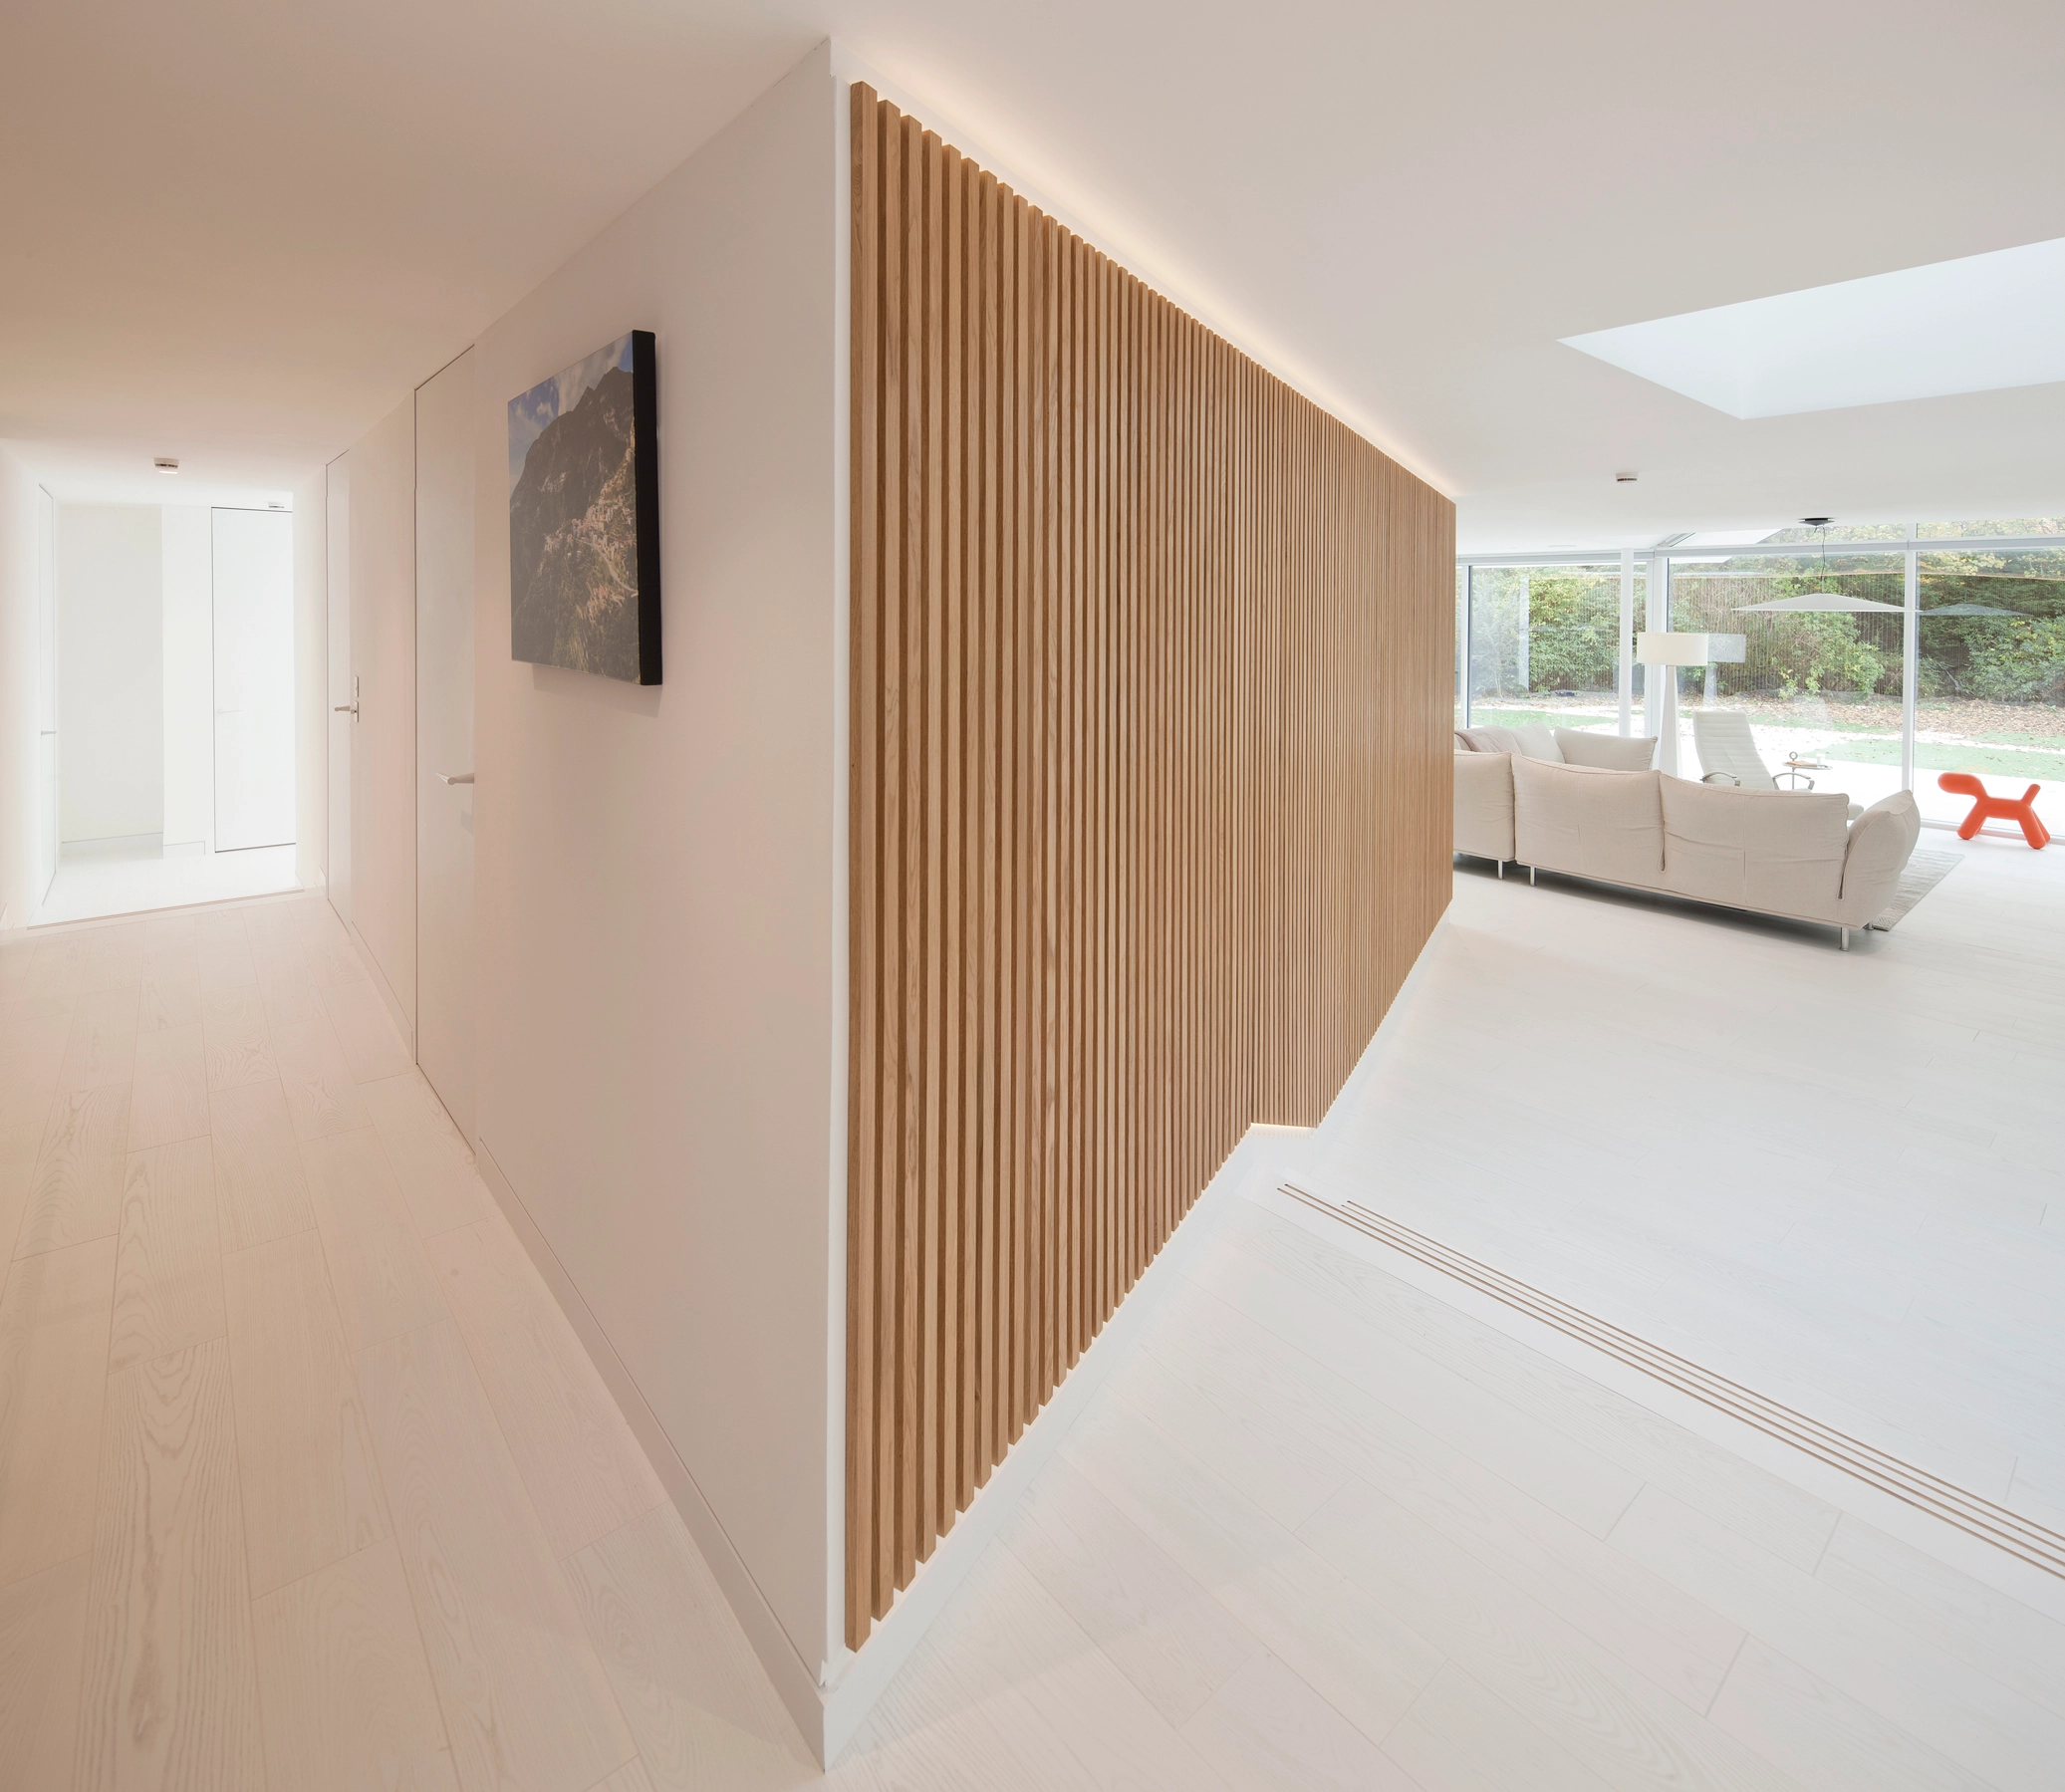 A modern home interior with white walls and white hardwood floors, strategically placed rooflights and windows to provide lots of natural light and views towards the spacious garden. The junction of the corridors showcases the timber panel cladded wall of the private sauna provided in the centre of the house layout.